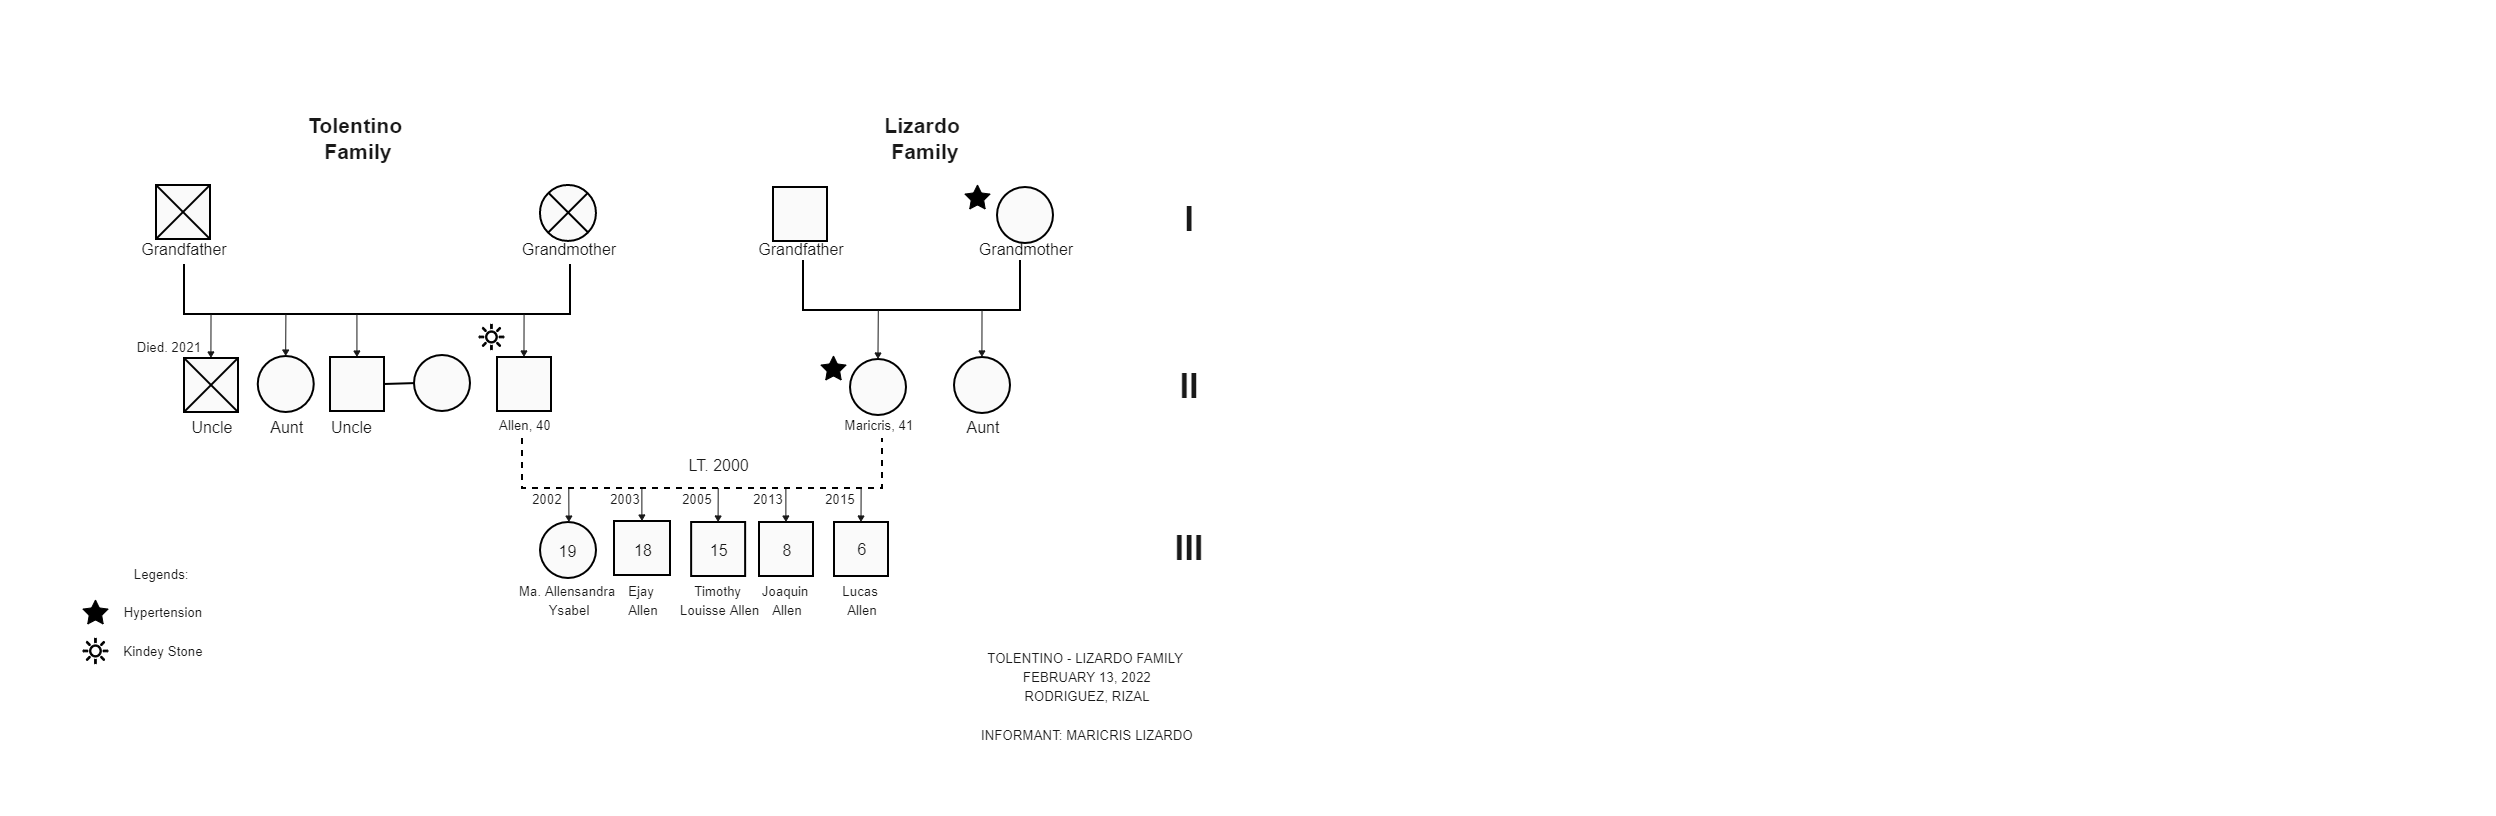 A Family Genogram about Ysabel Family is shown above. Genograms are now used by various groups of people in a variety of fields such as medicine, psychology, social work, genetic research, education, and youth work to name but a few.